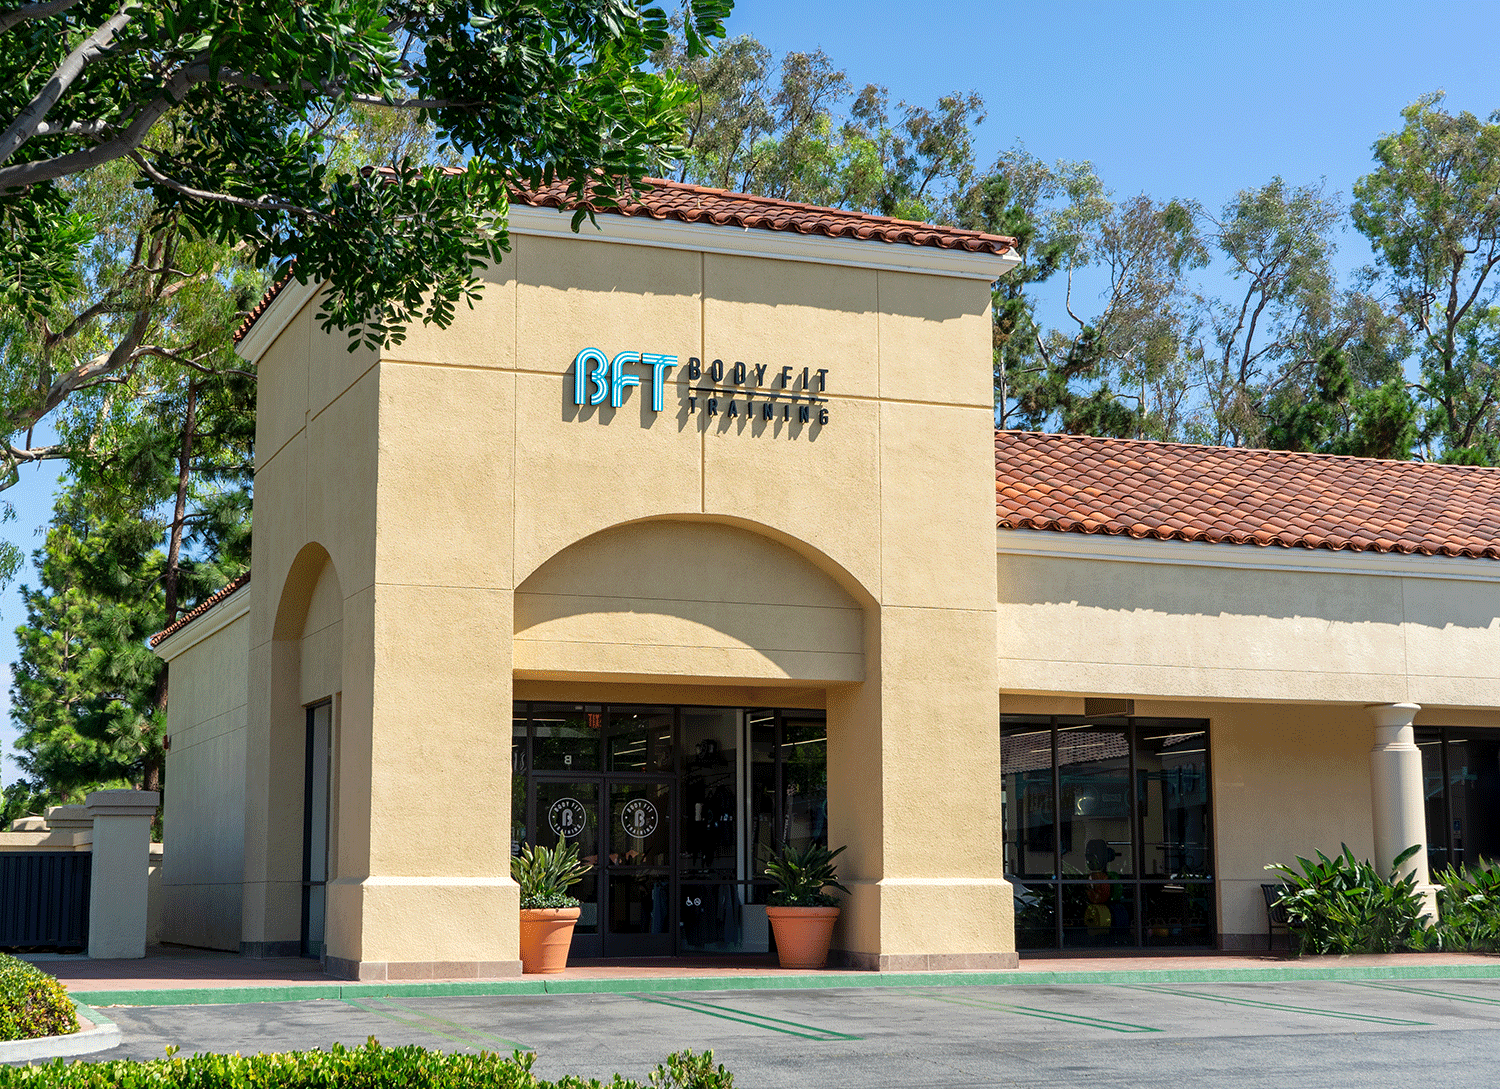  View of BFT, Body Fit Training, at Harvard Place Shopping Center